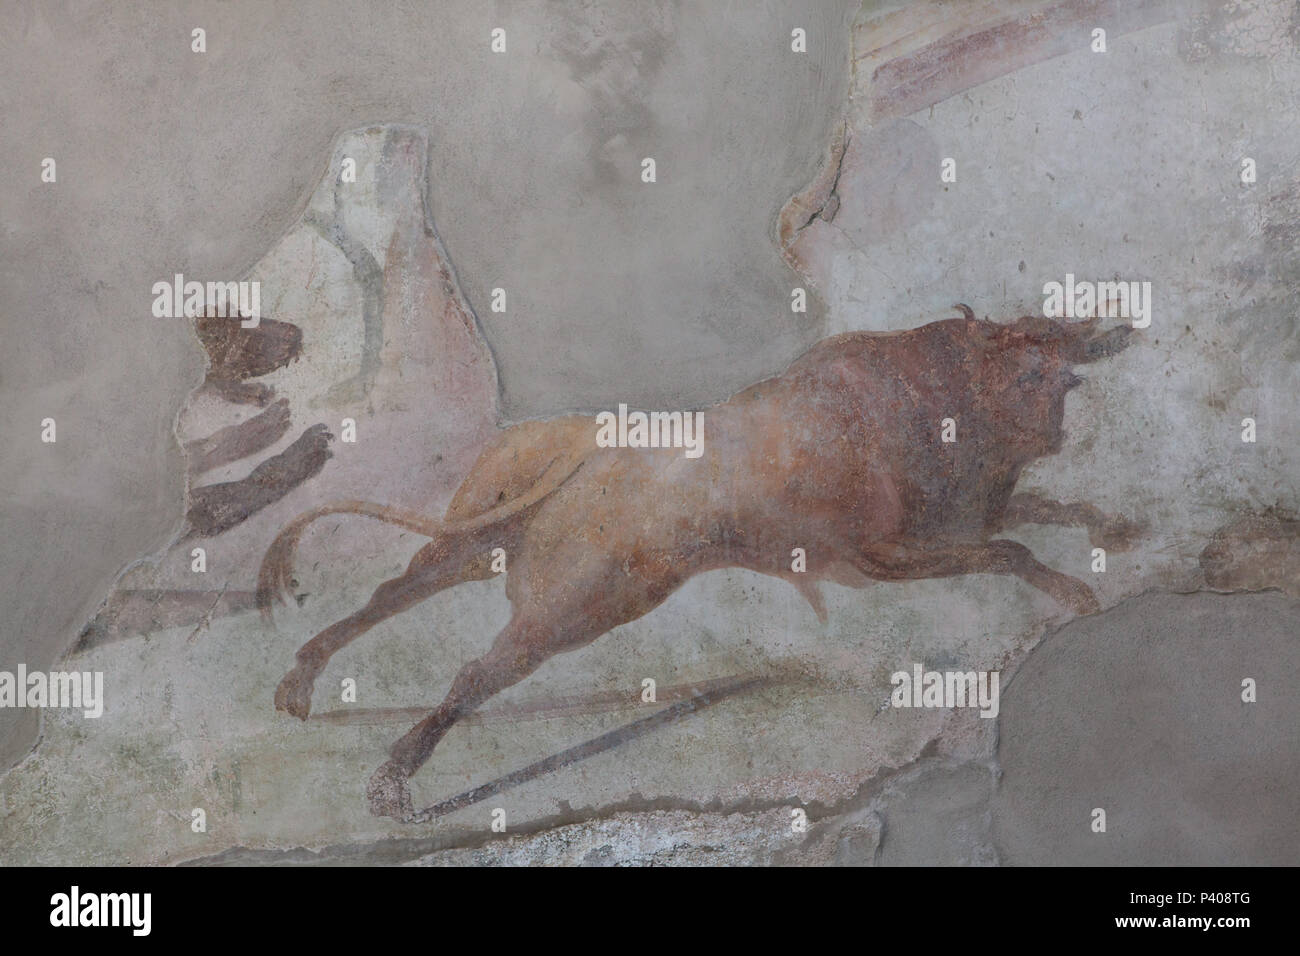 Aurochs (Bos primigenius) running followed by a bear depicted in the Roman fresco in the summer triclinium (Roman dining room) of the House of the Ephebe (Casa dell'Efebo) in the archaeological site of Pompeii (Pompei) near Naples, Campania, Italy. Stock Photo